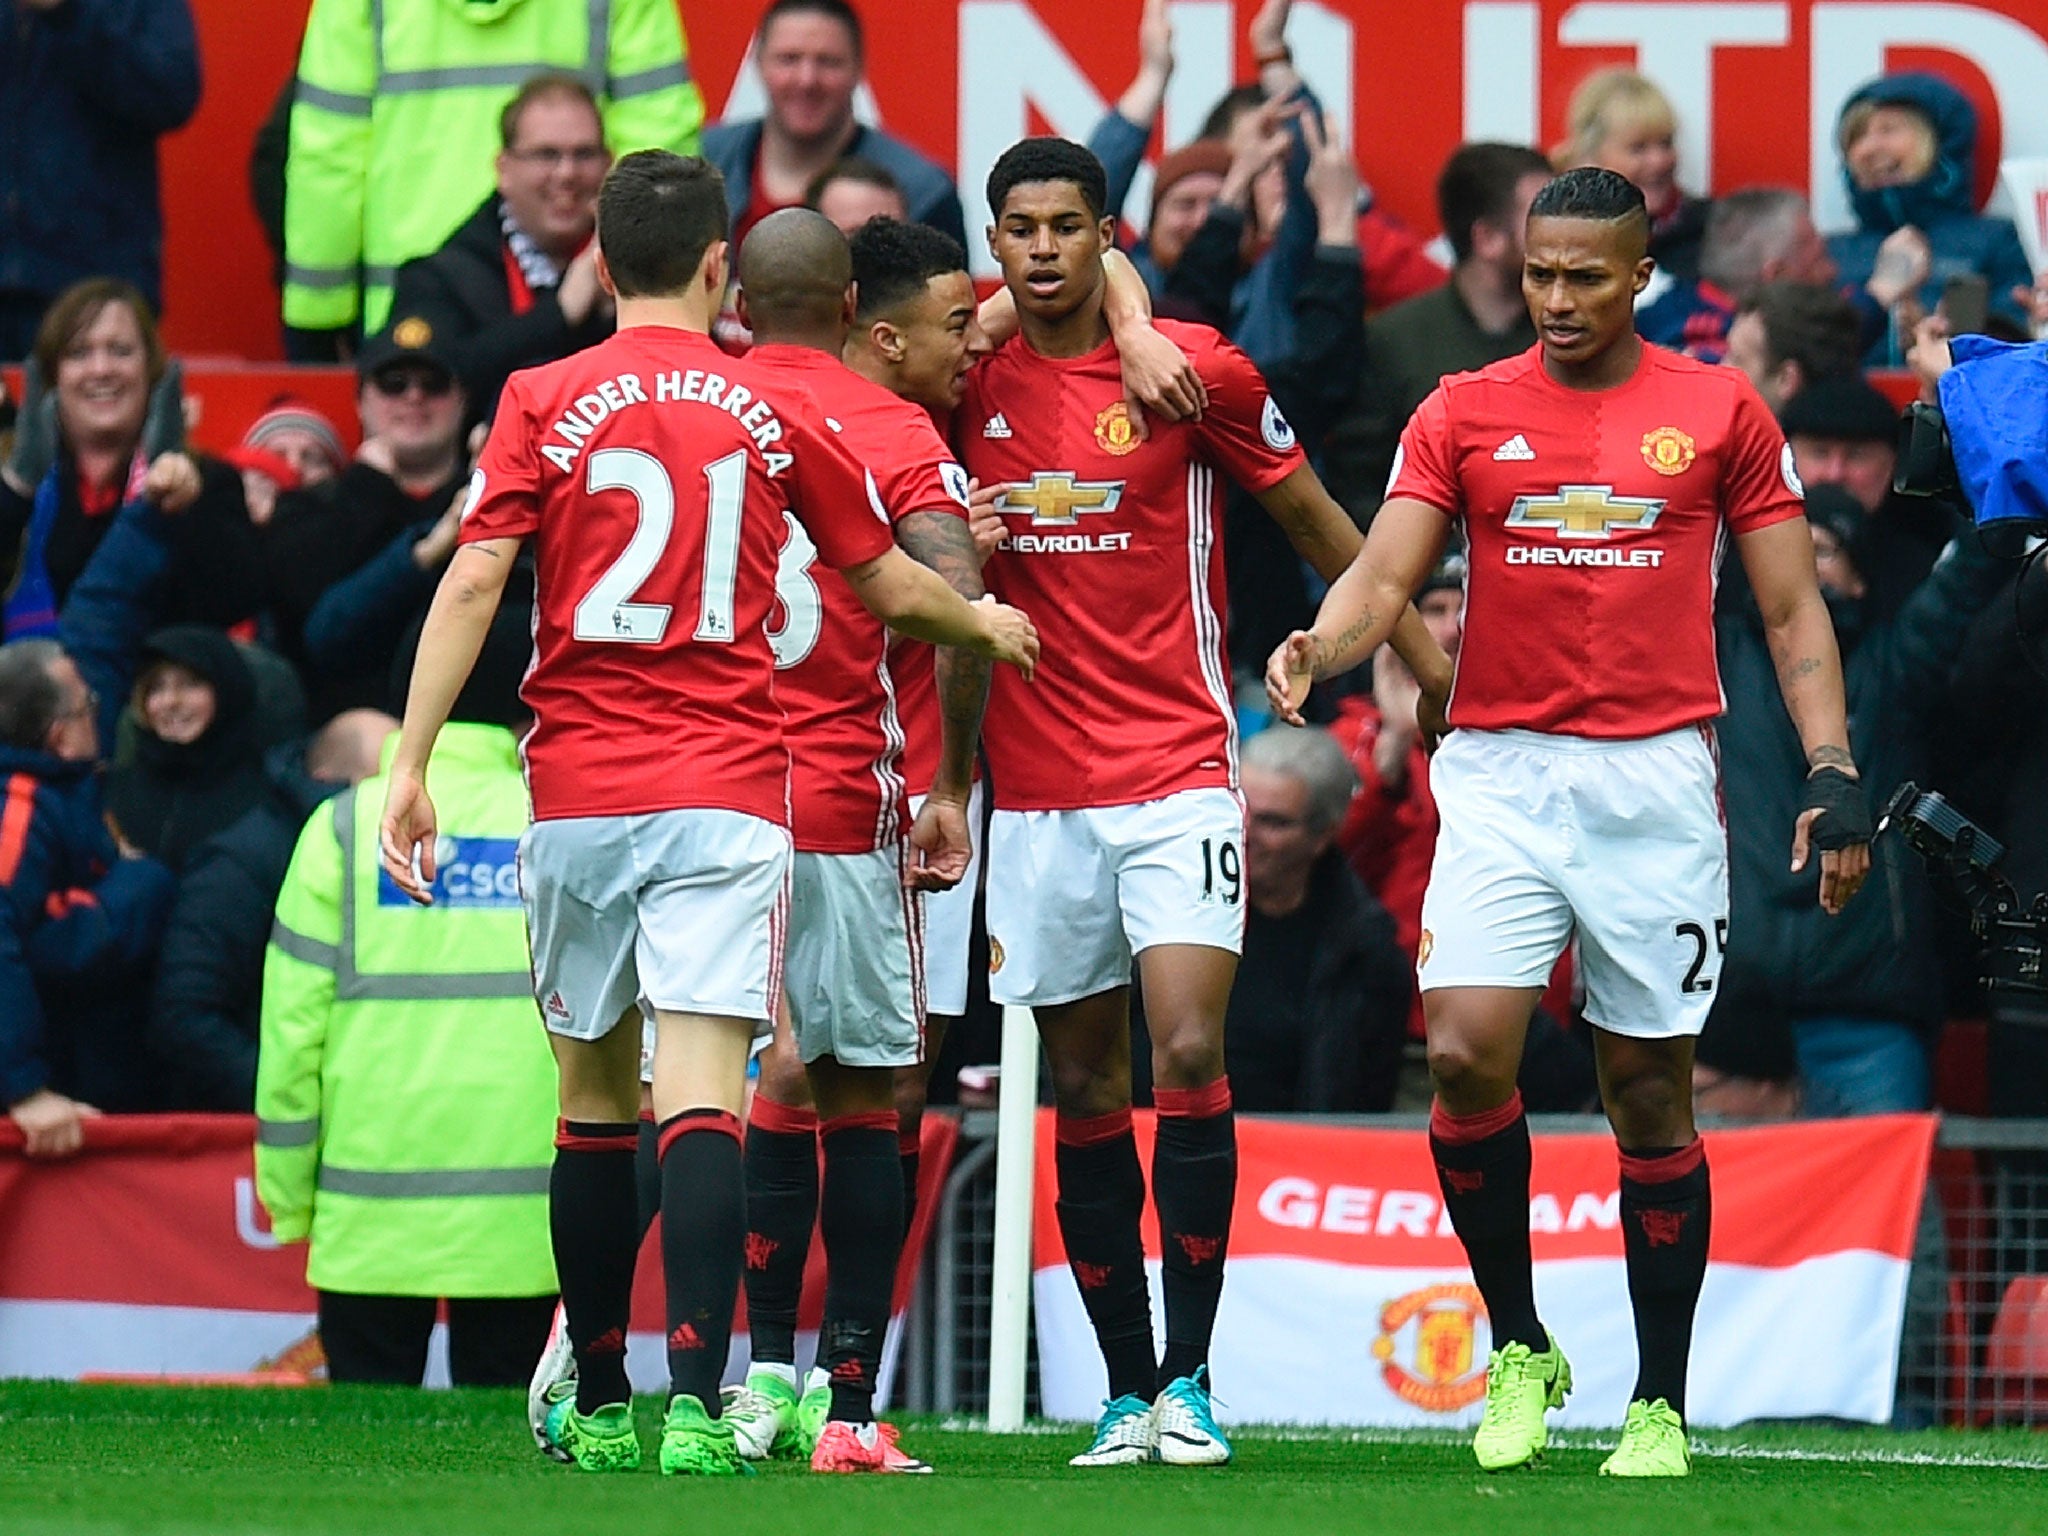 Manchester United face Chelsea at Old Trafford on Sunday